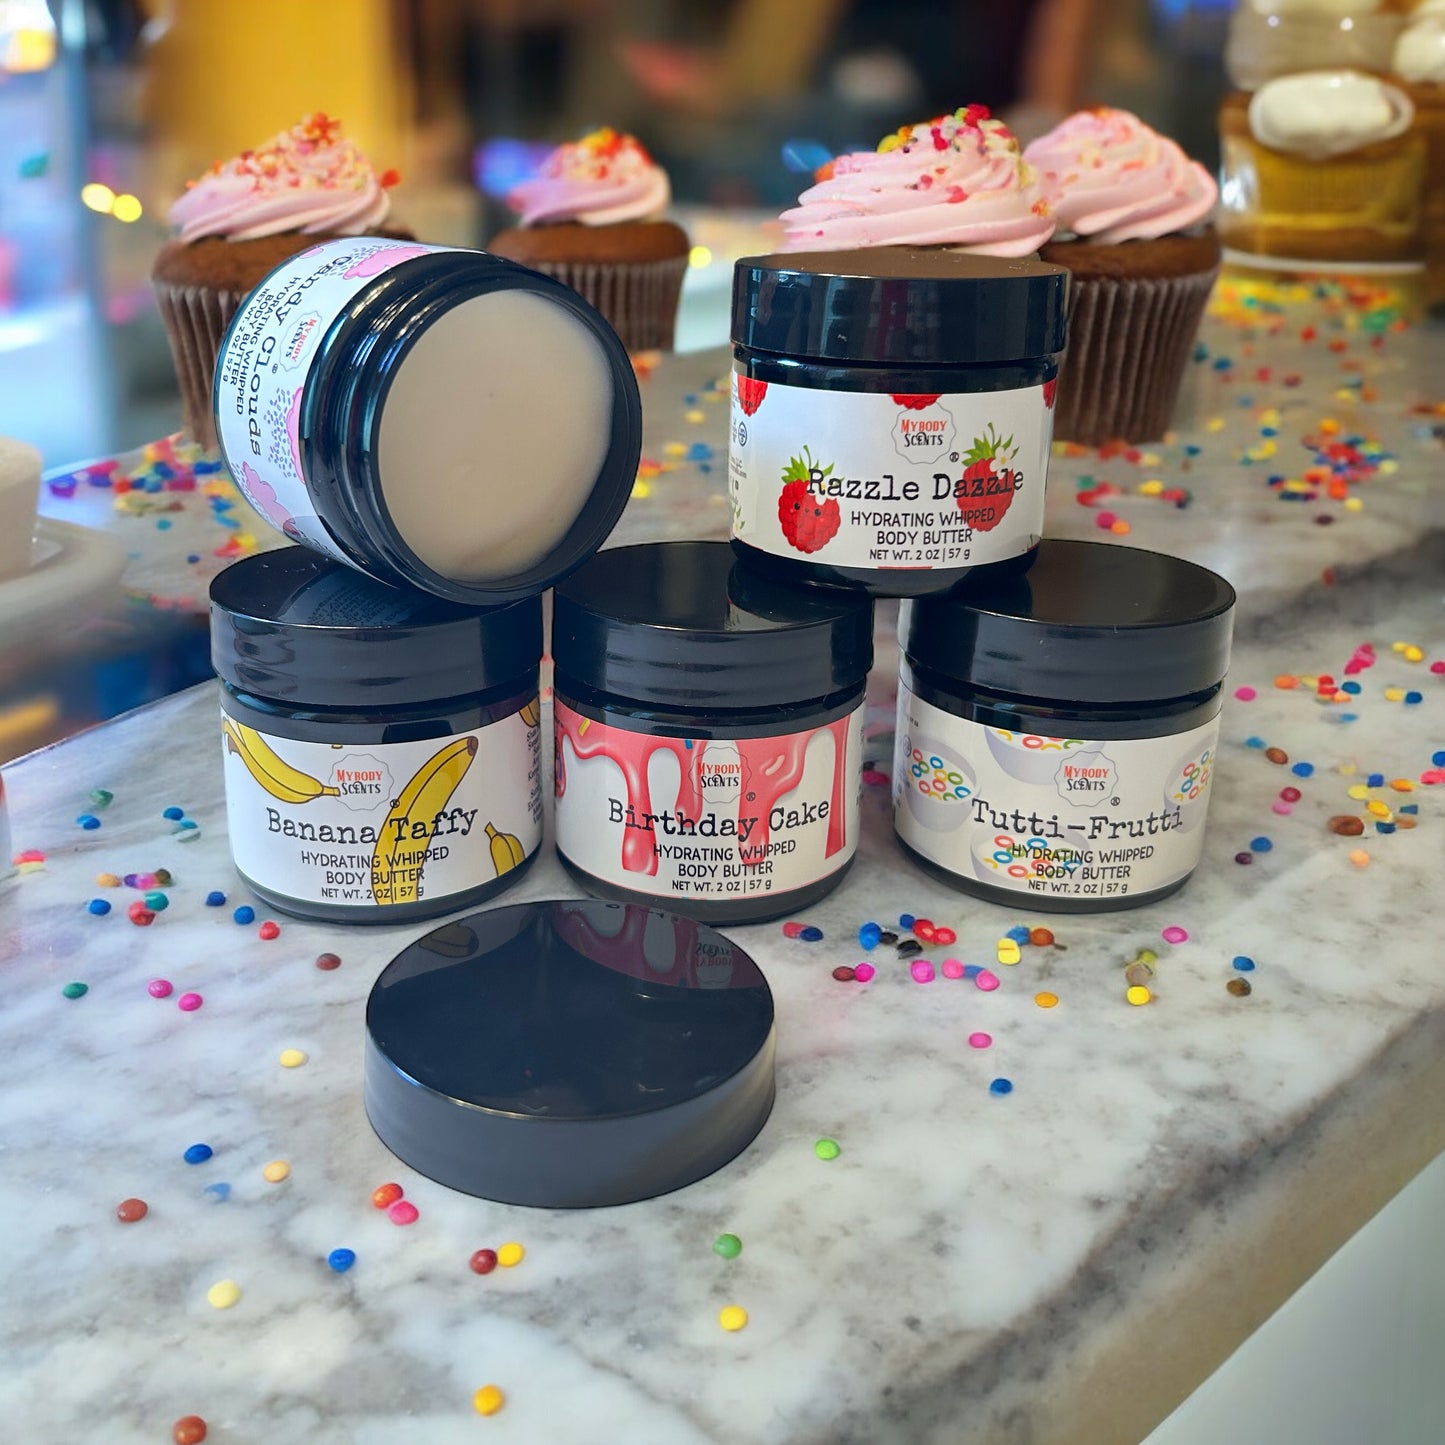 Try Me Playful Body Butter Bundle